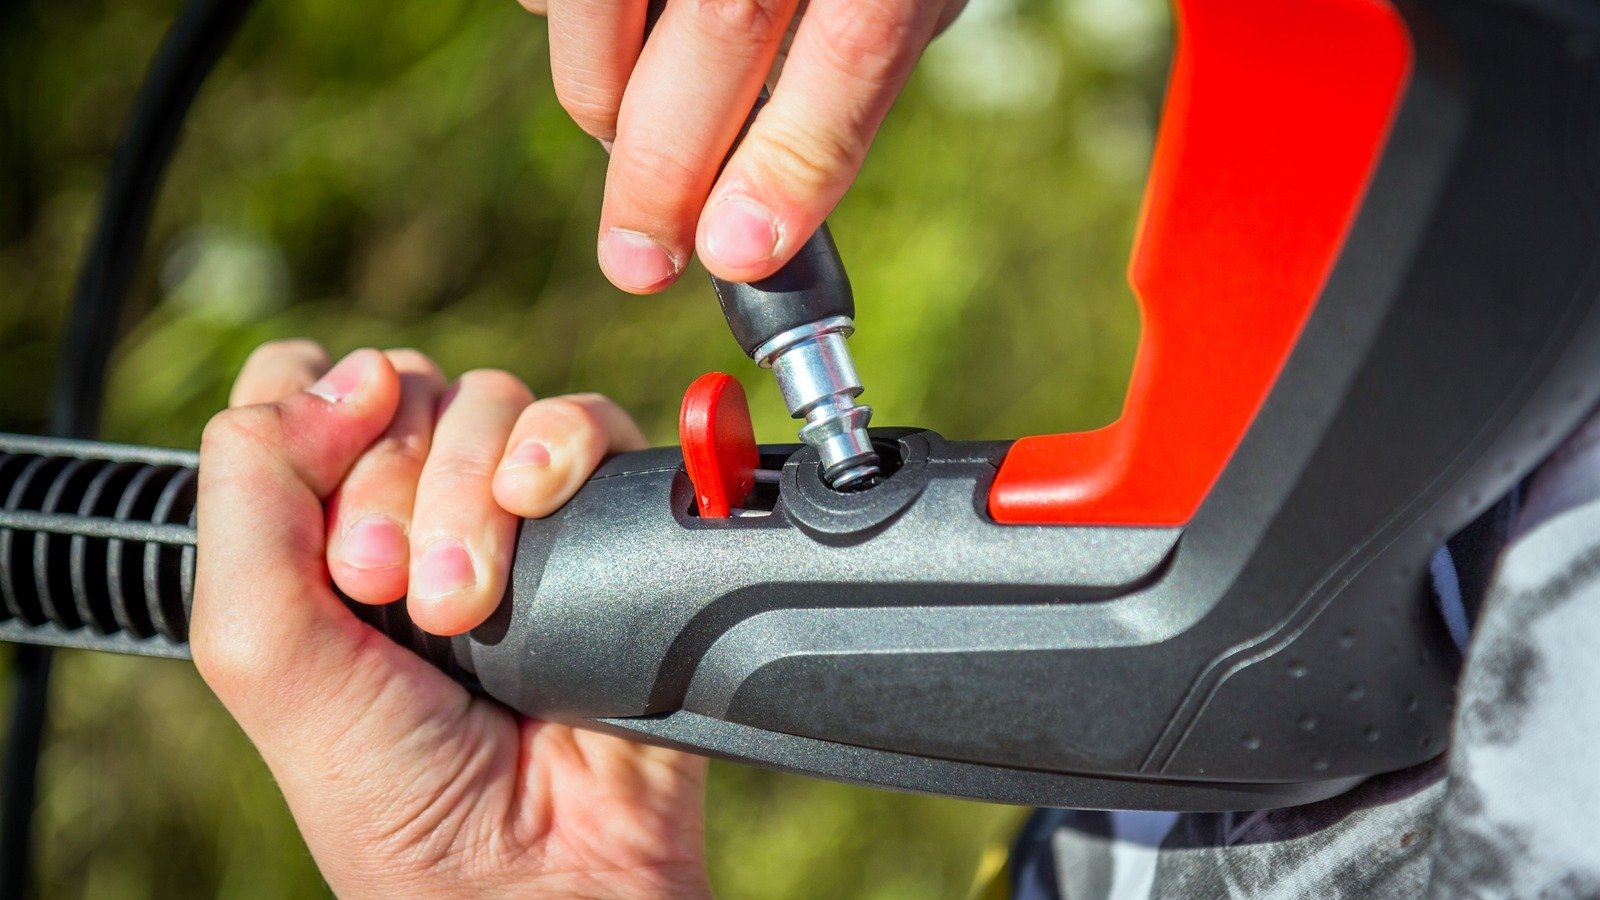 3 Pressure Washer Attachments To Buy For An Even Better Clean - House Digest